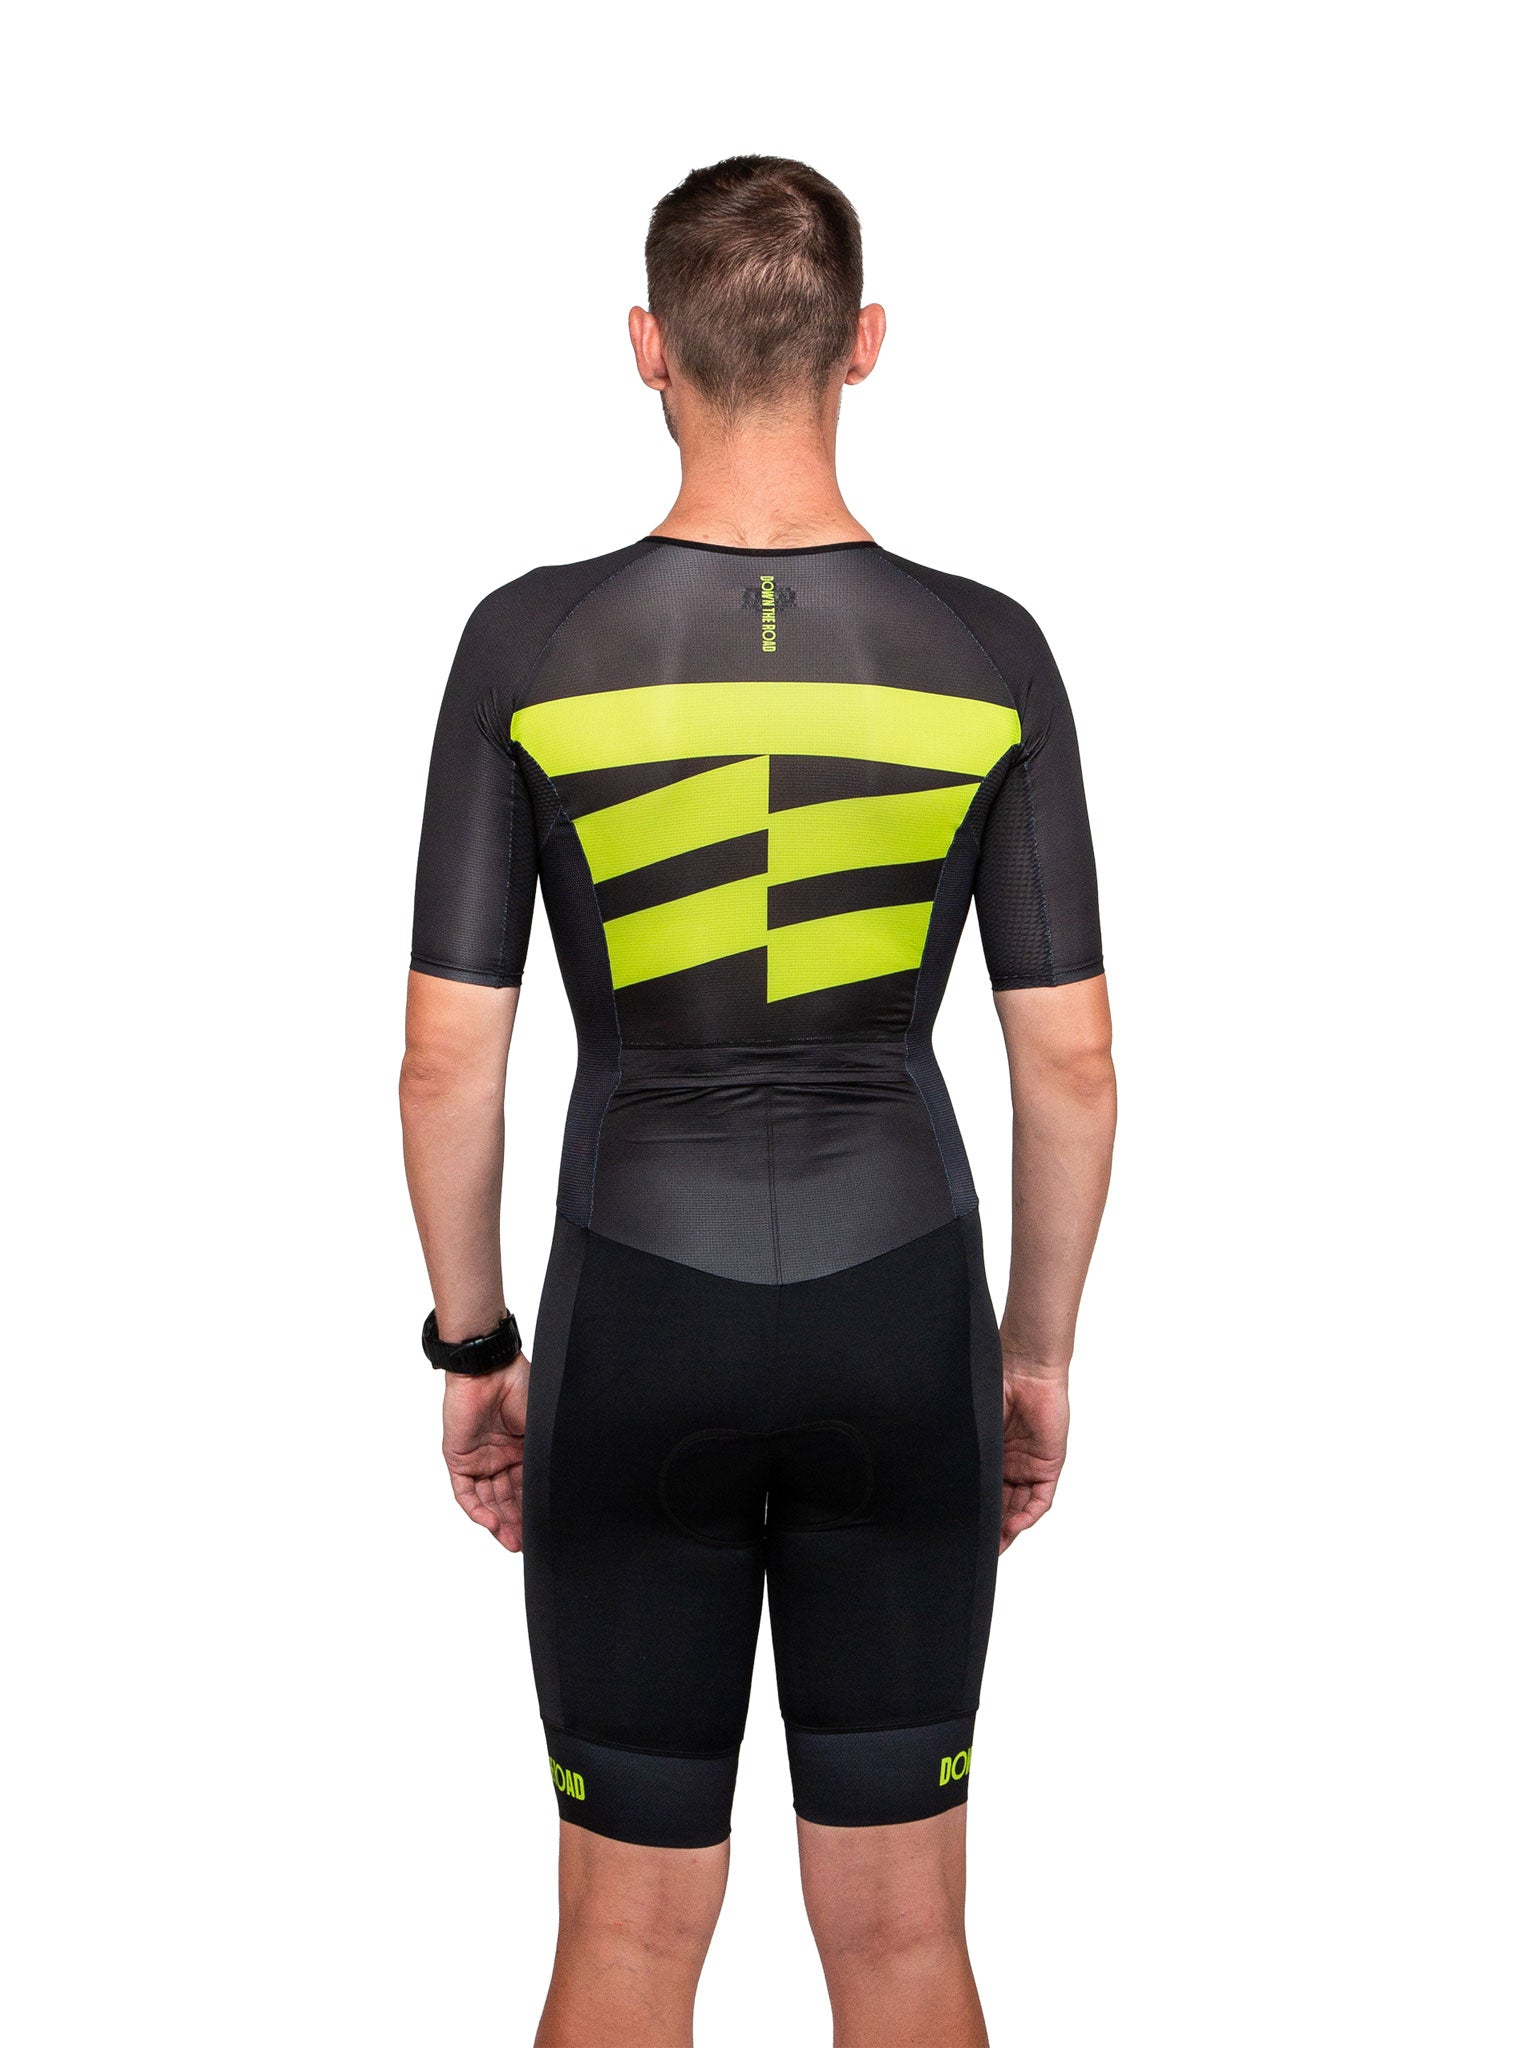 black trisuit for men with green details back view